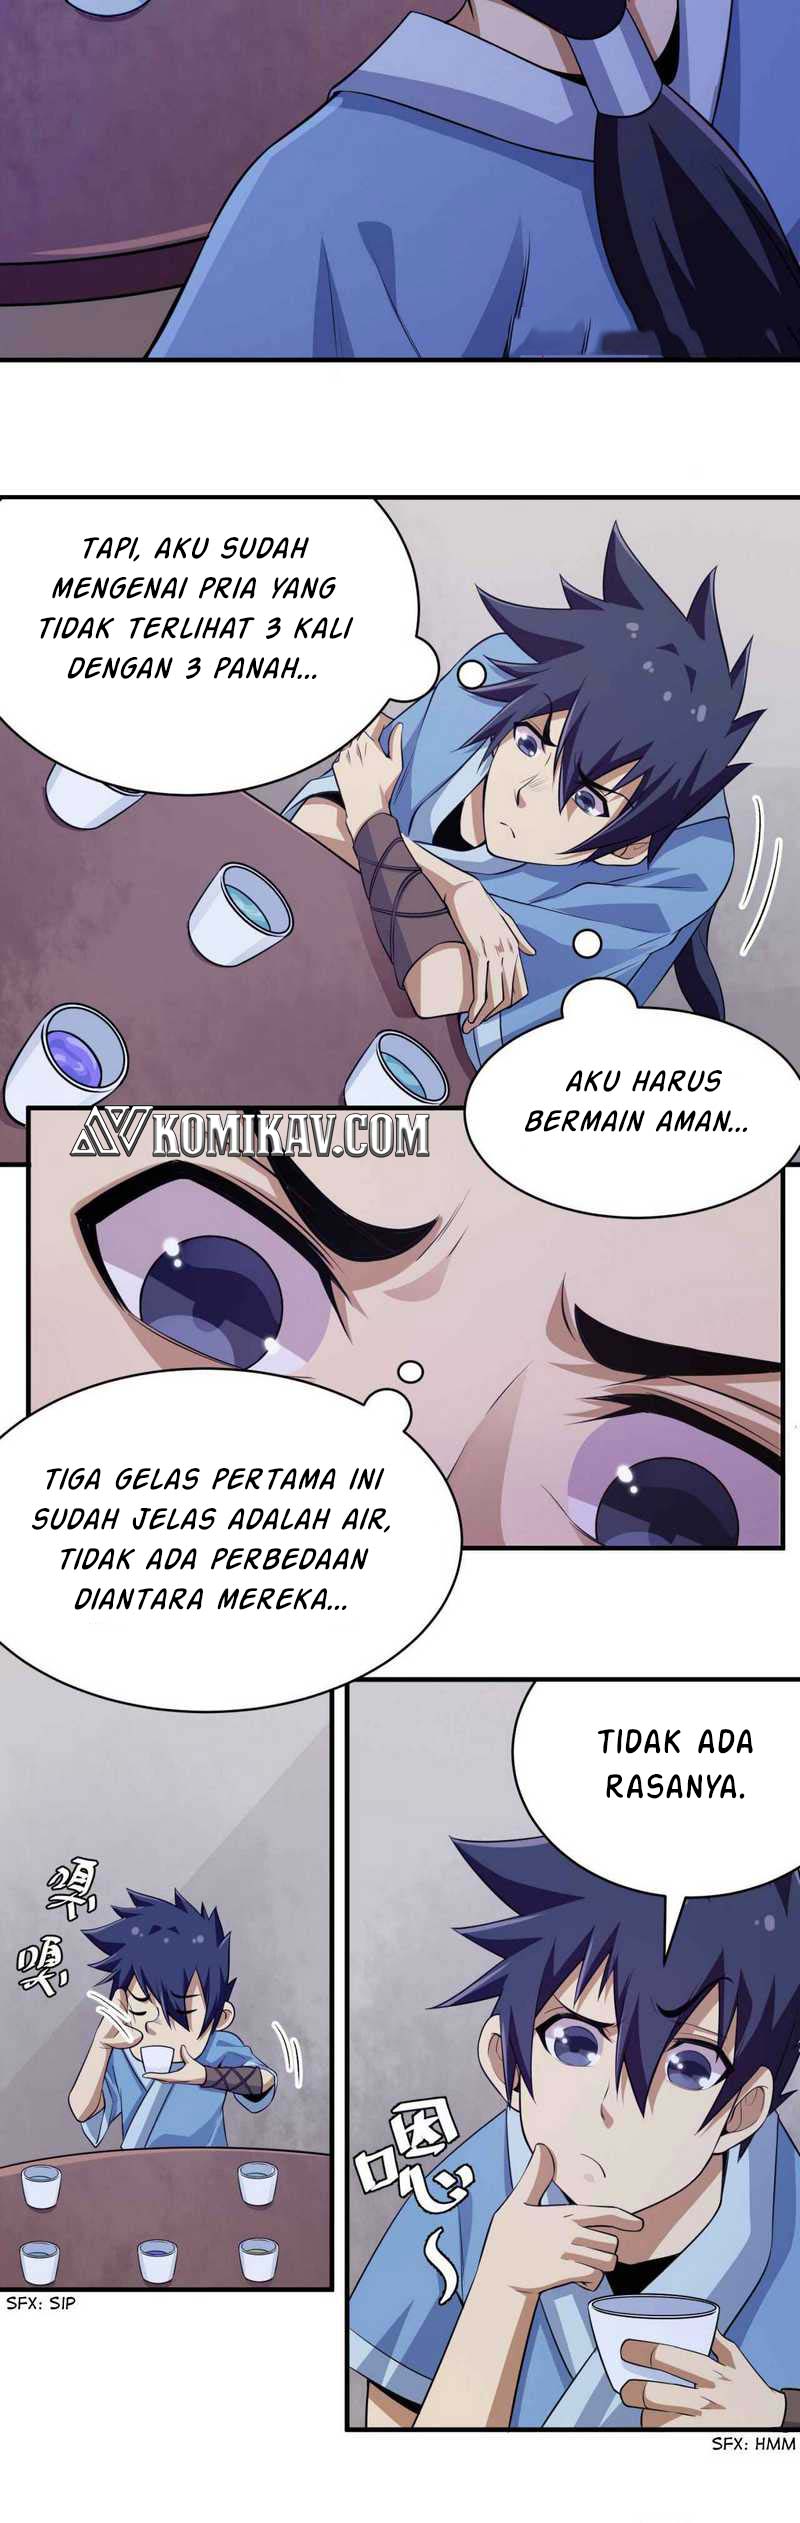 Dilarang COPAS - situs resmi www.mangacanblog.com - Komik i just want to be beaten to death by everyone 010 - chapter 10 11 Indonesia i just want to be beaten to death by everyone 010 - chapter 10 Terbaru 9|Baca Manga Komik Indonesia|Mangacan